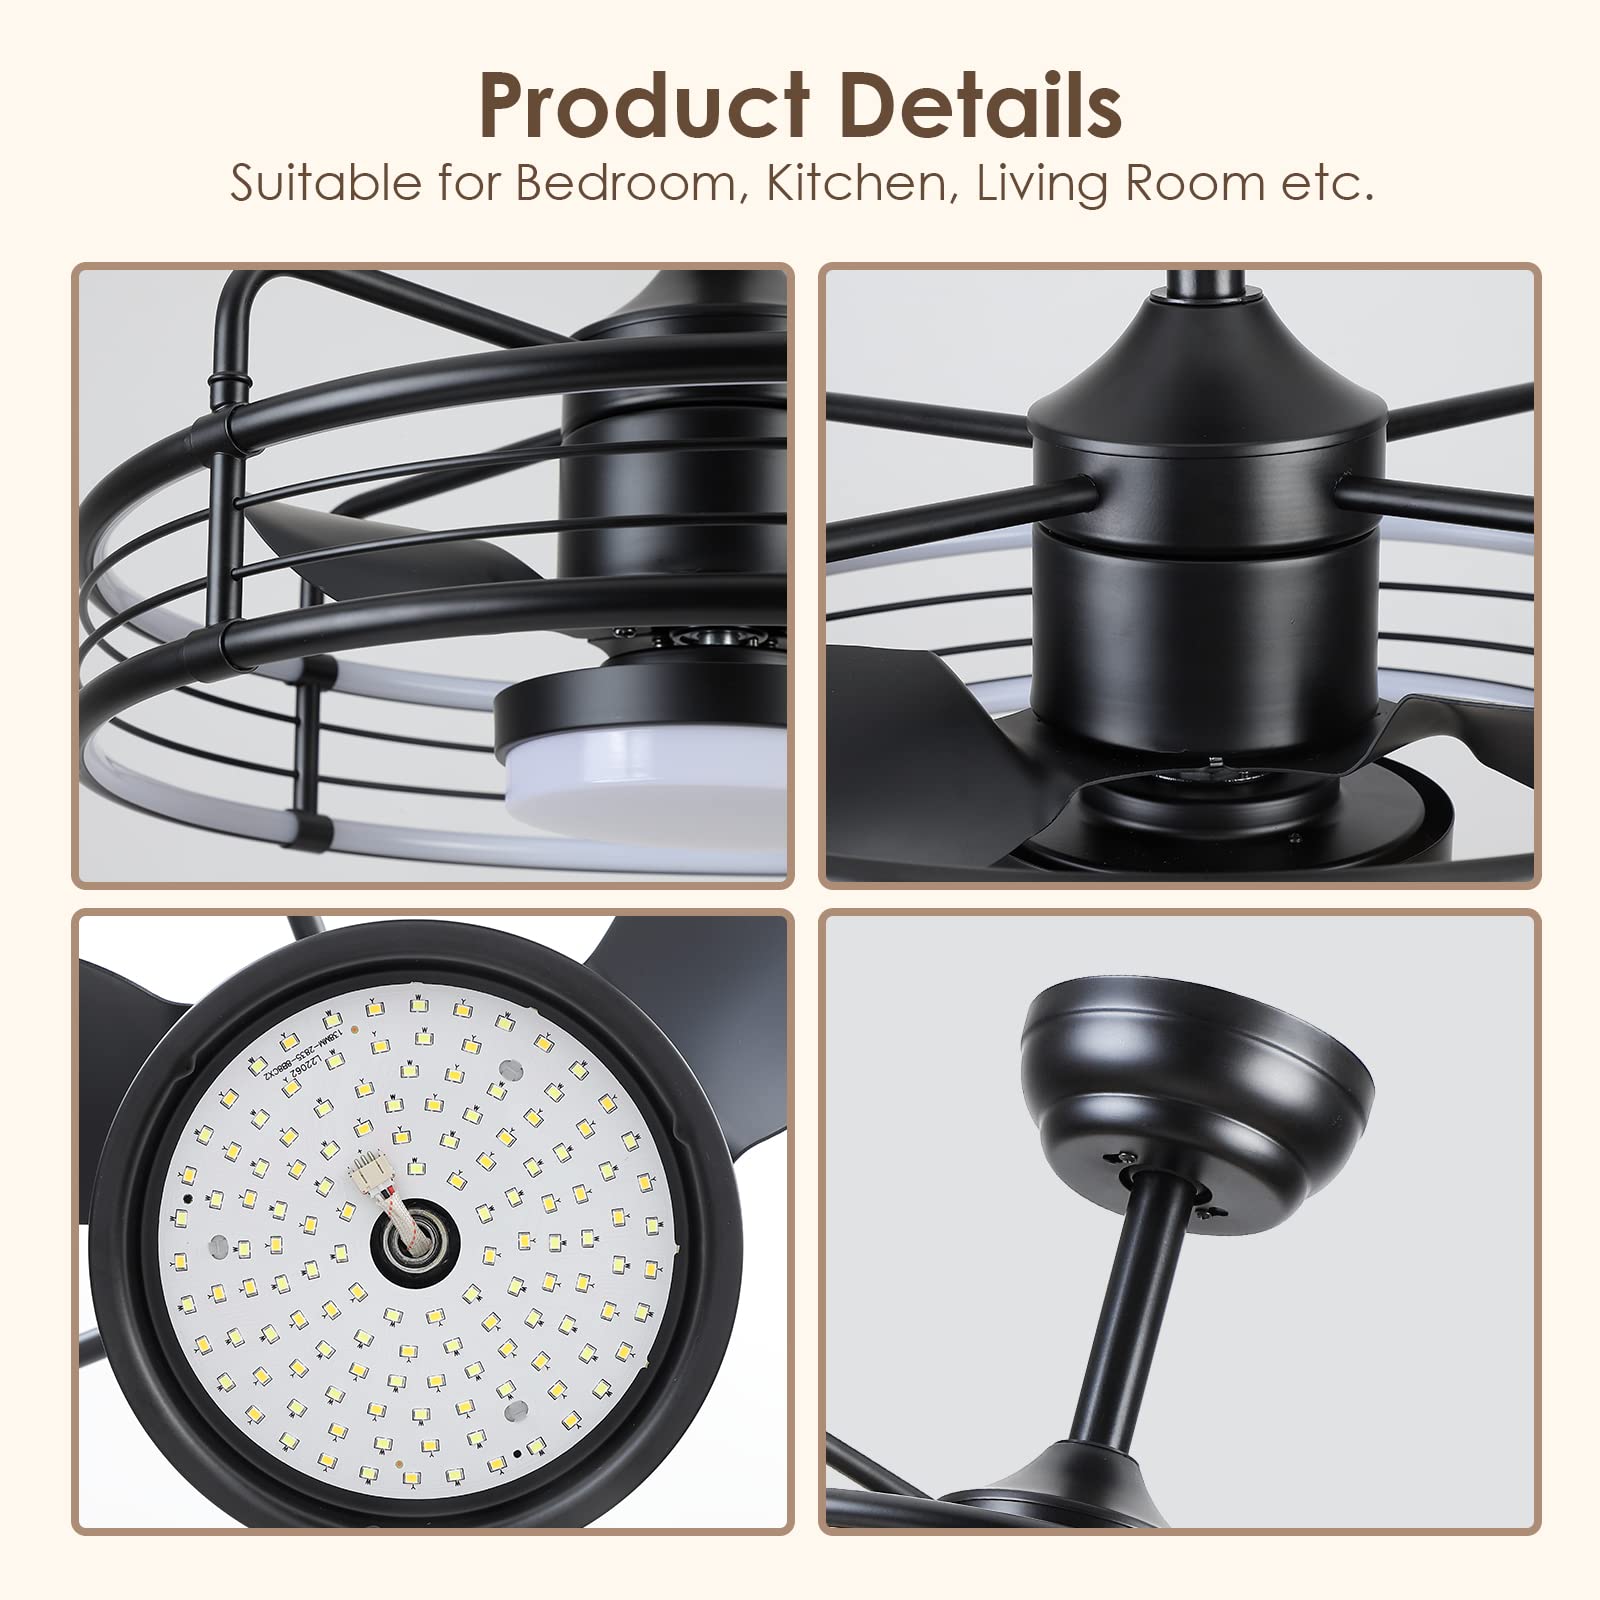 Asyko Caged Ceiling Fan with Light - Bladeless Black Ceiling Fans with Remote, Reversible and Dimmable, Low Profile Flush Mount Ceiling Fan with 6-Speed, Enclosed Led Fan Light for Bedroom, Kitchen…